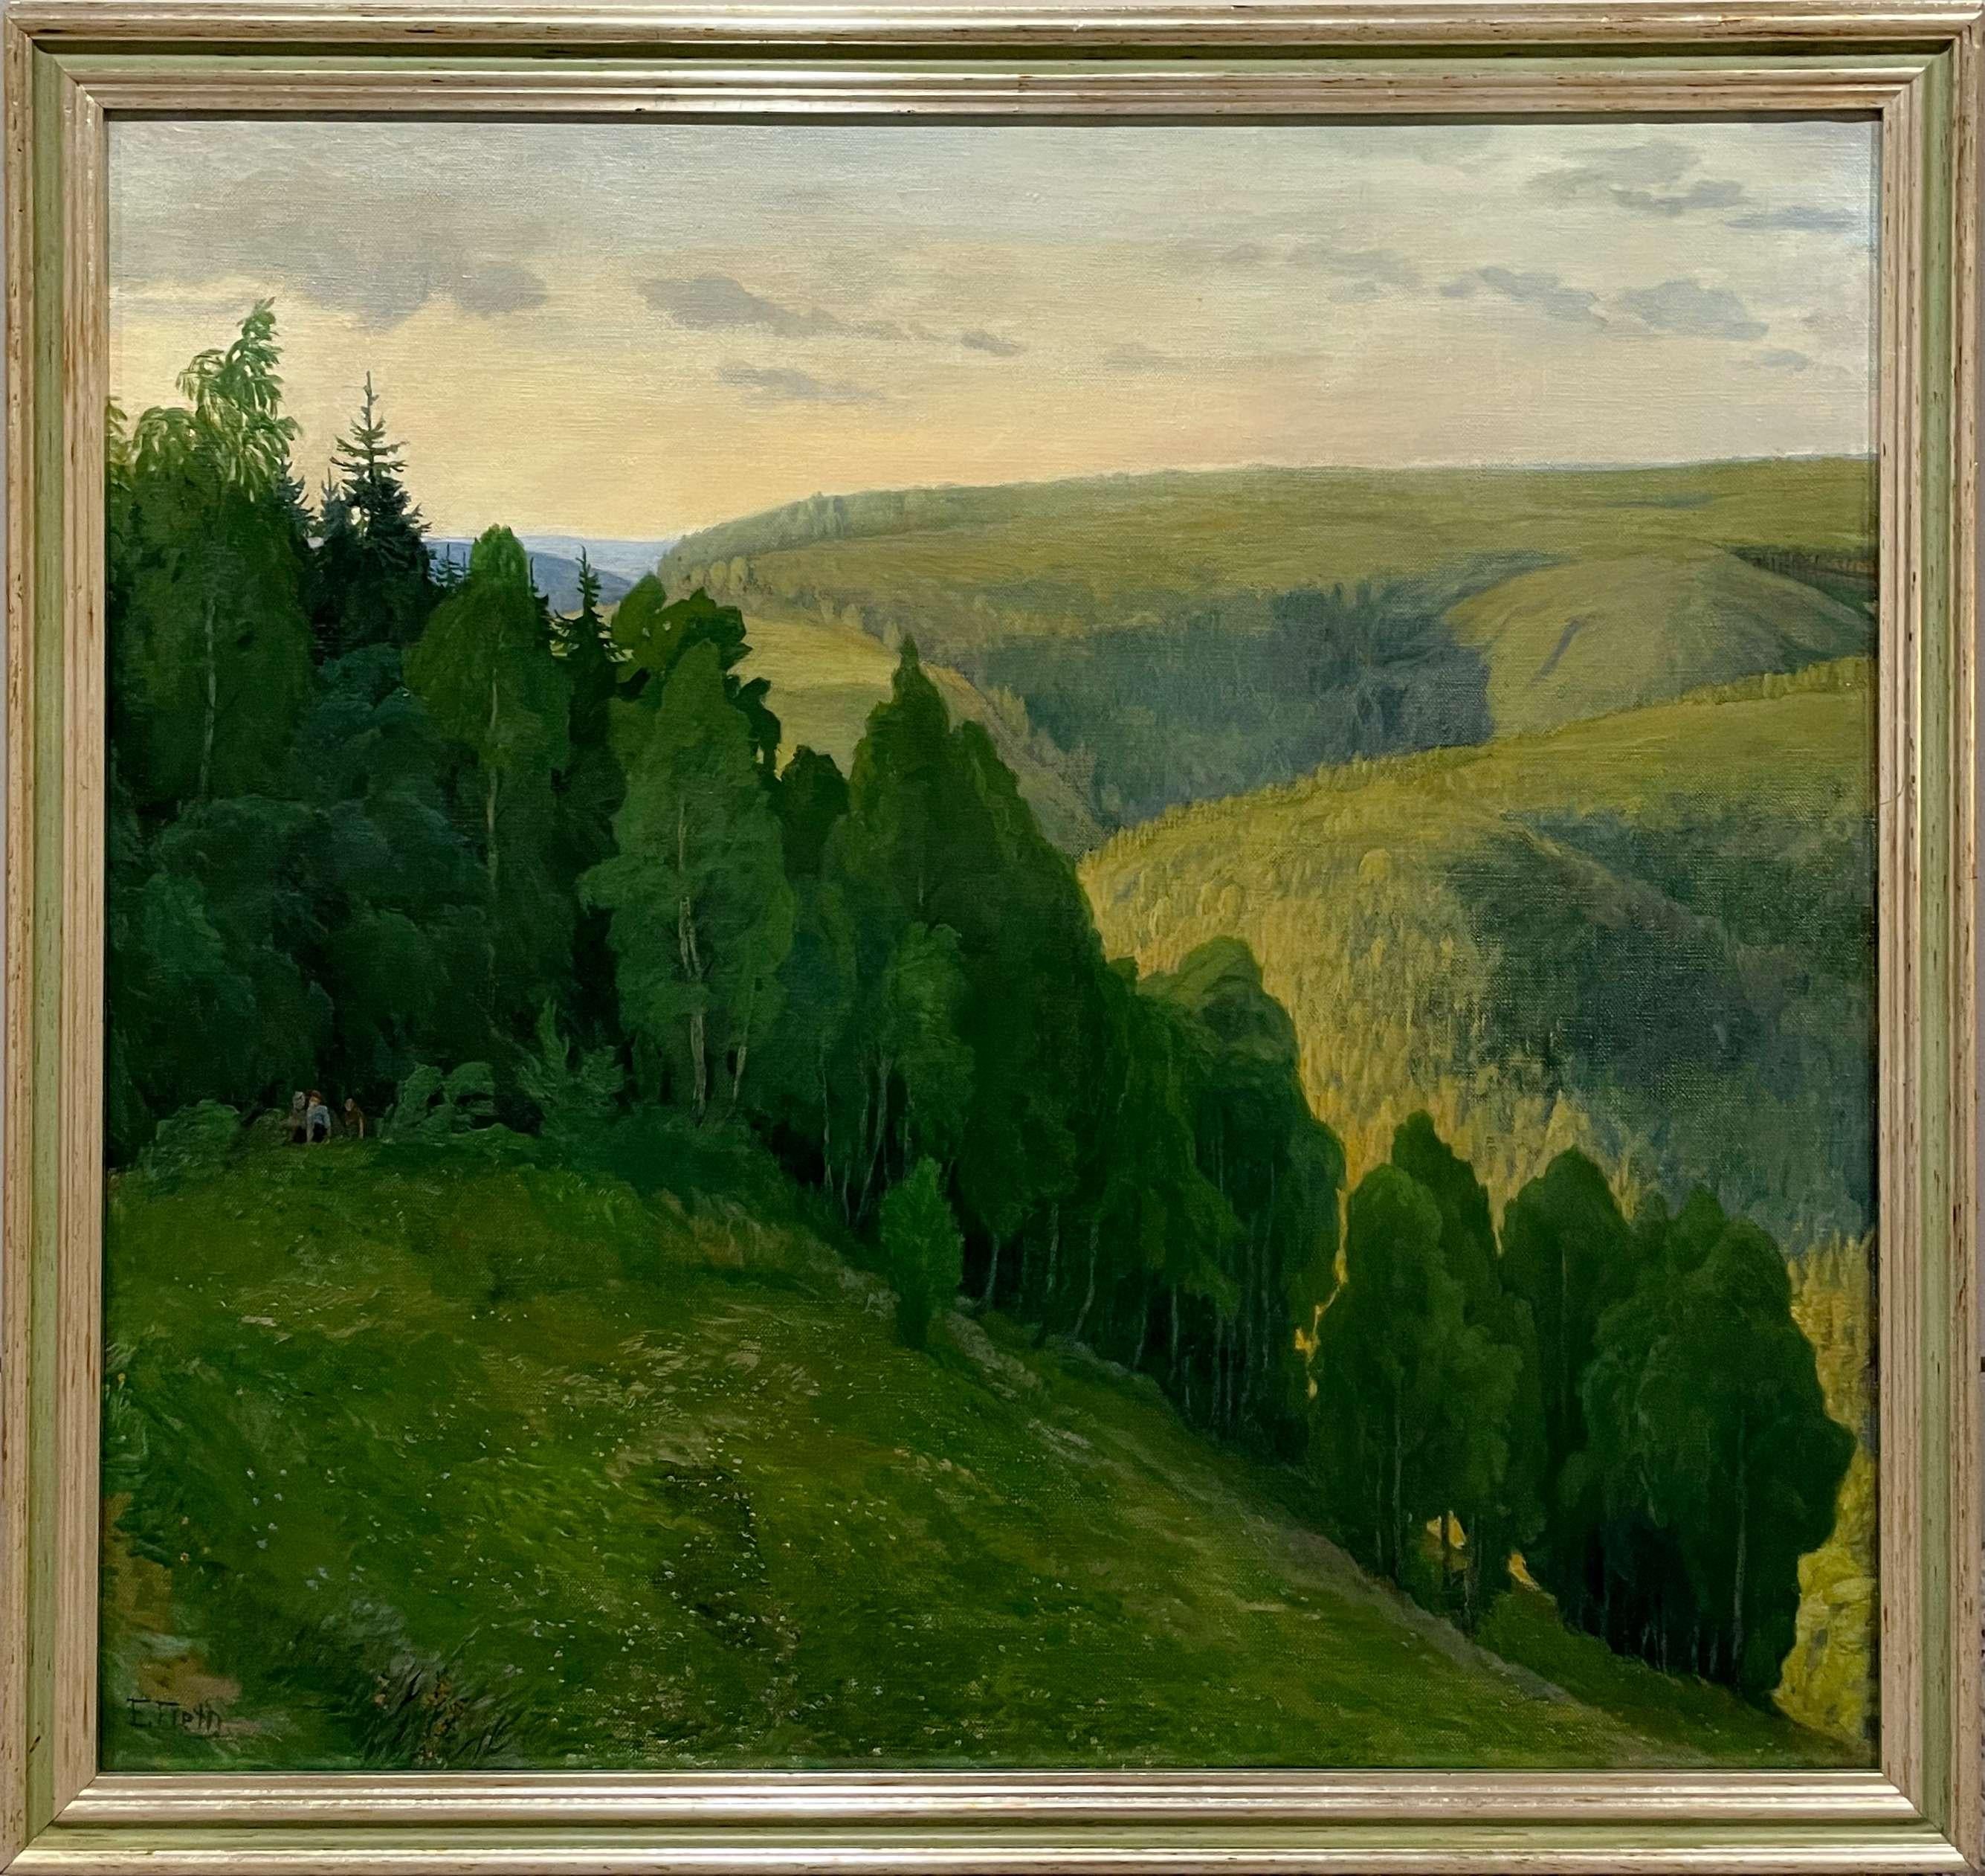 A Beautiful European Landscape/Mountainscape by artist European Artist E. Feith - Painting by Unknown